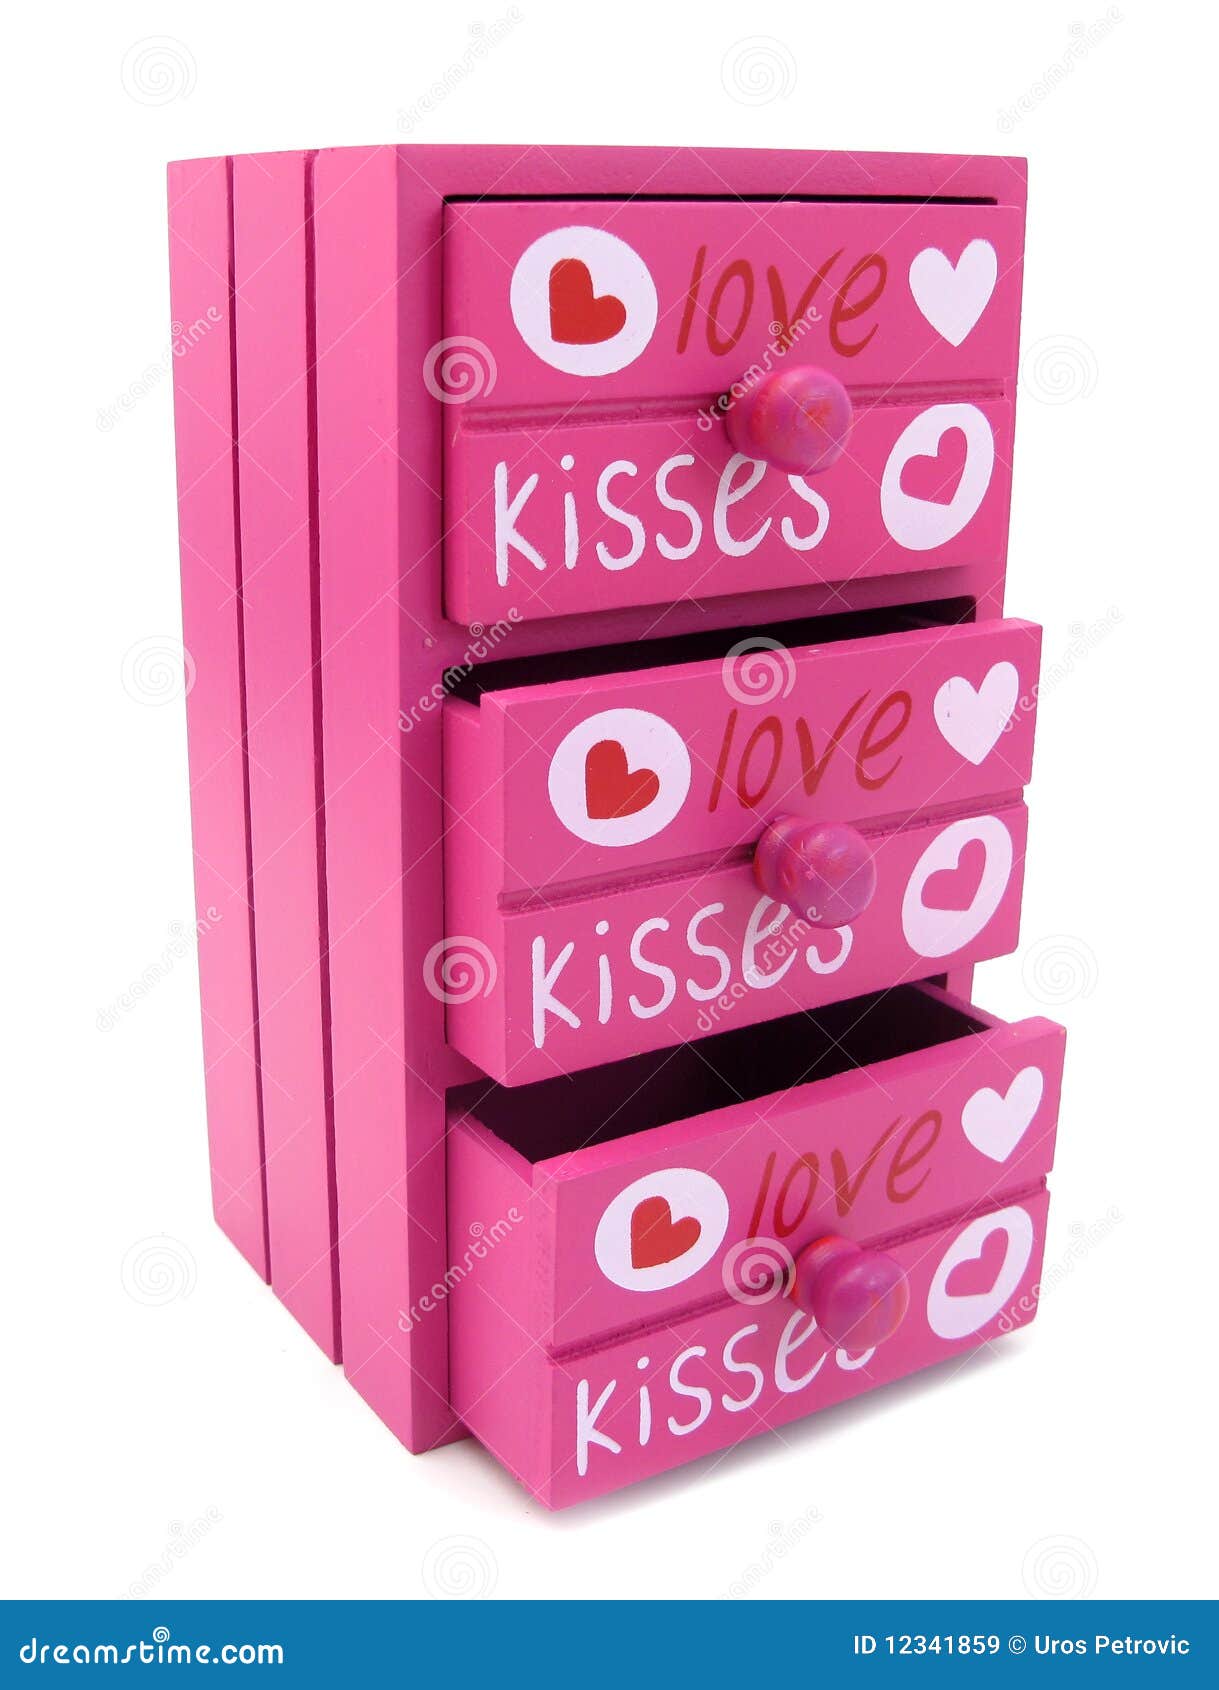 chest of drawers pink with words of love and heart